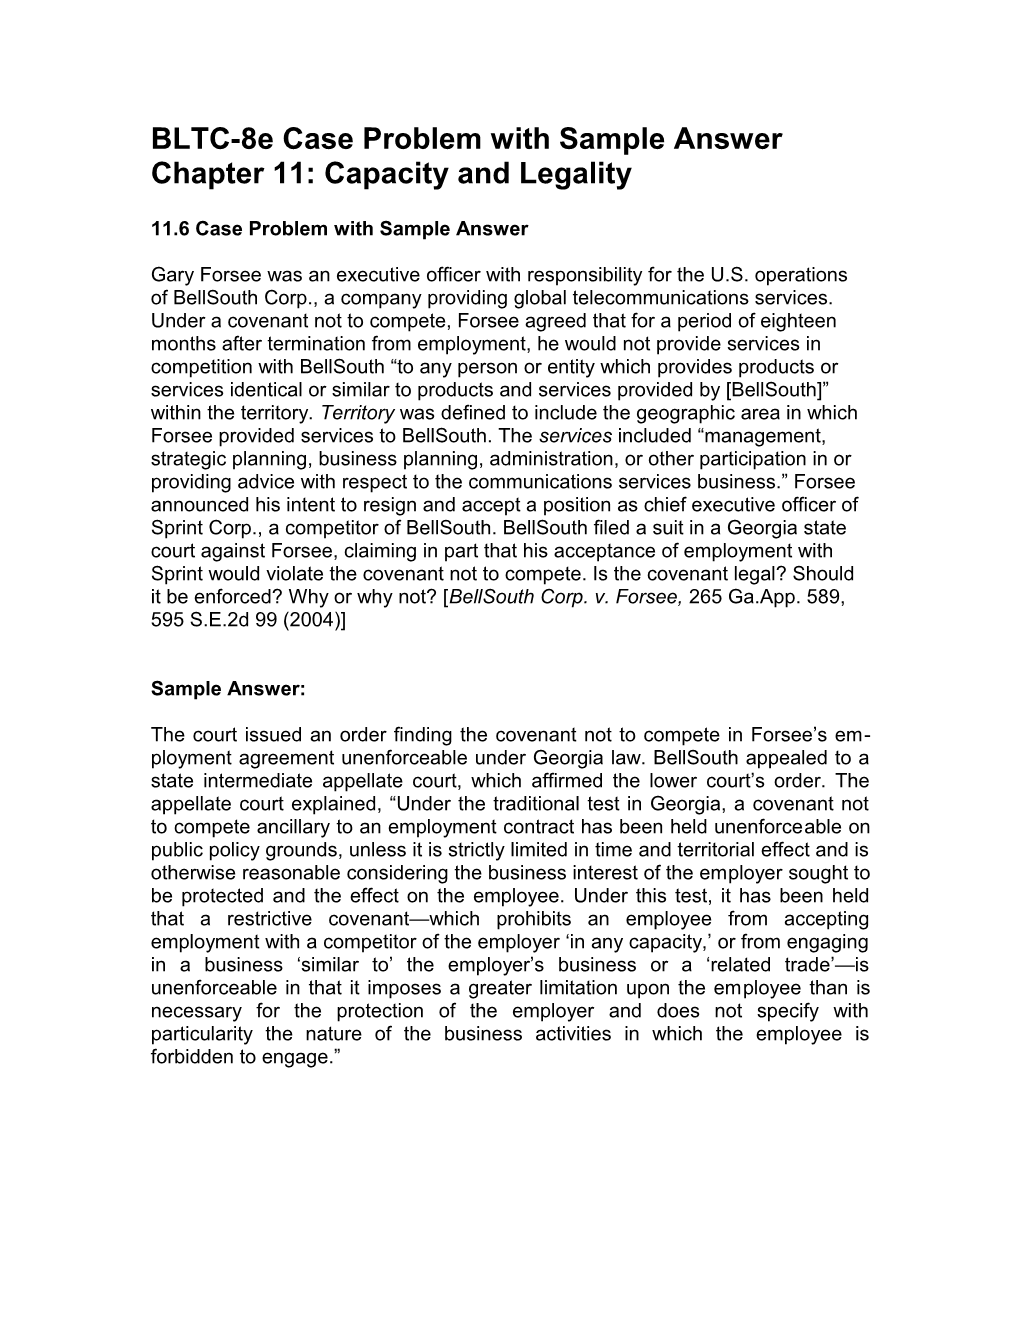 Chapter 4 - Constitutional Authority to Regulate Business s11